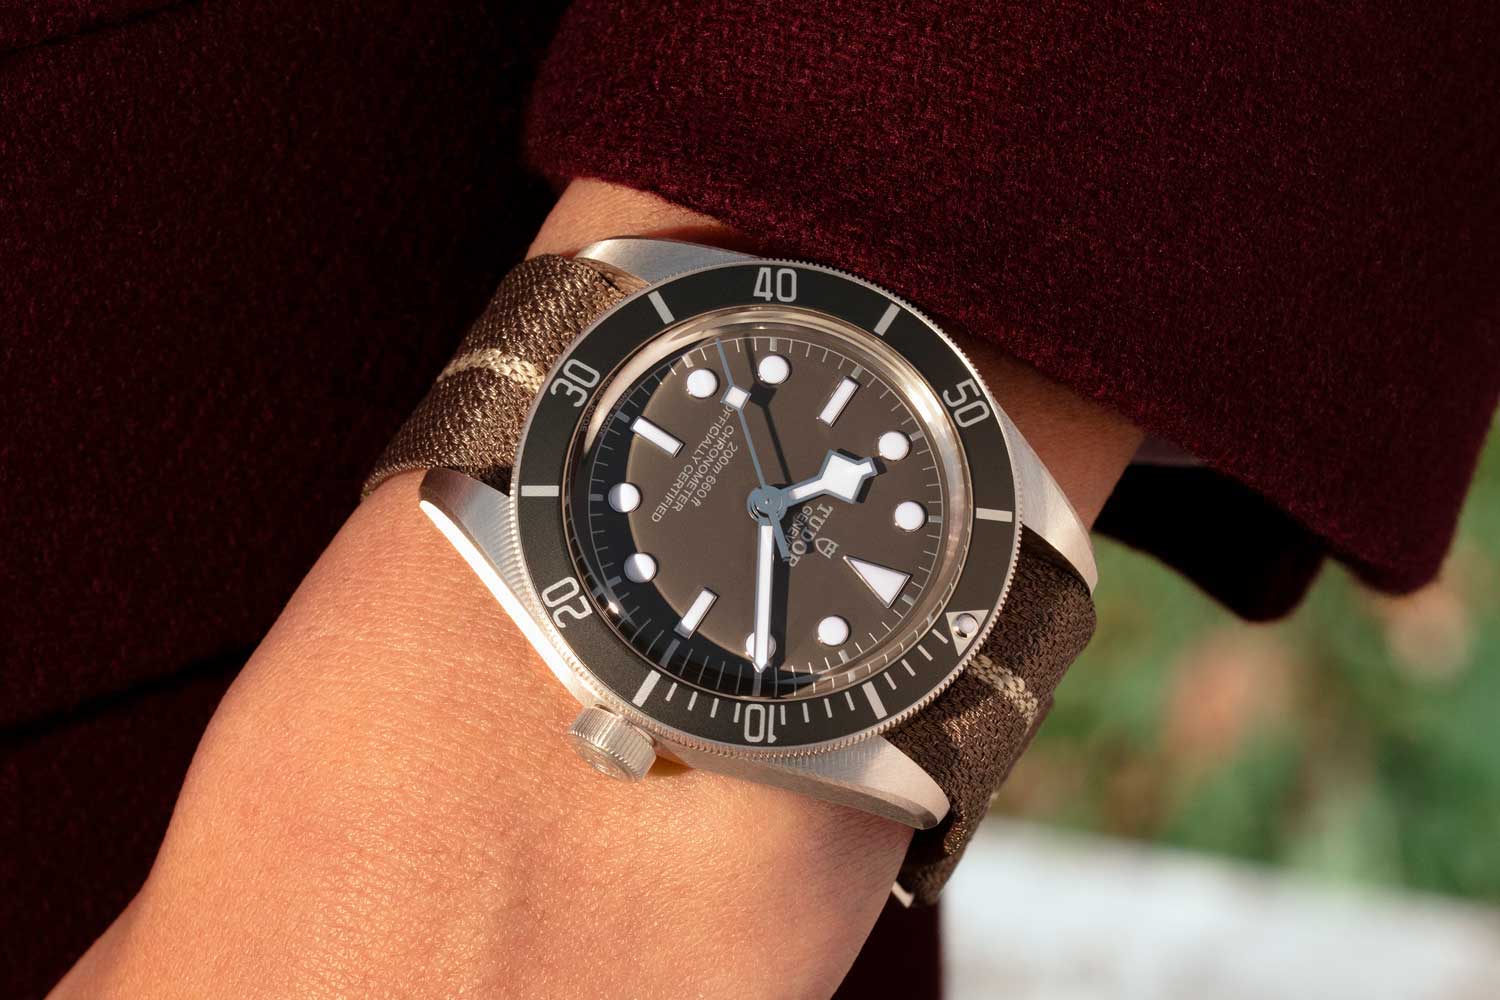 One of the new releases that impressed Seddiqi this year was the Tudor Black Bay Fifty-Eight 925 Silver.